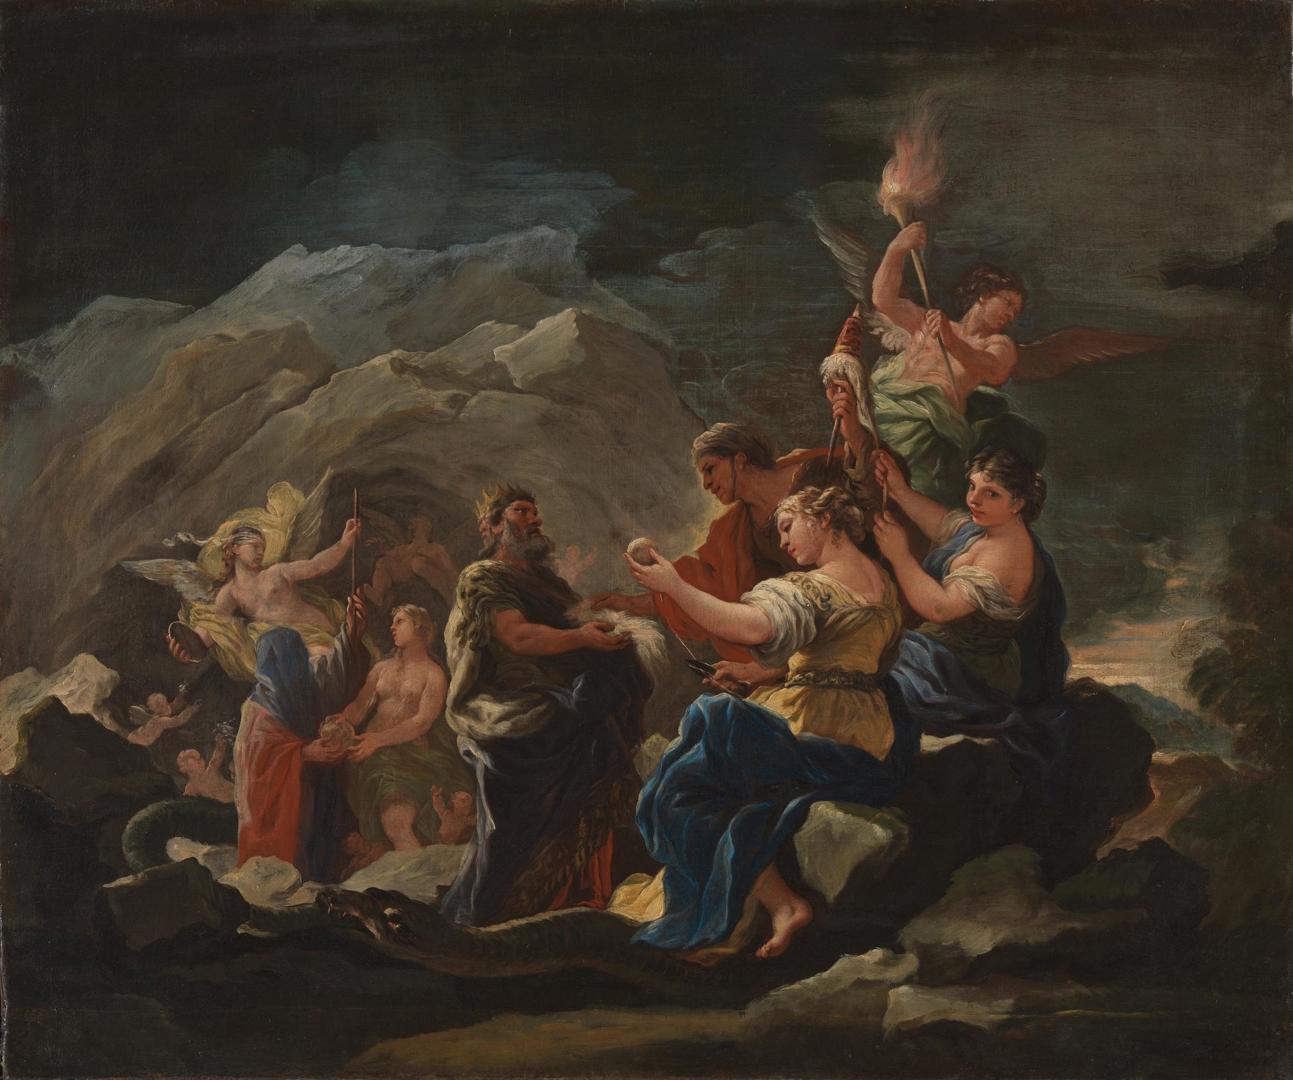 The Cave of Eternity by Luca Giordano